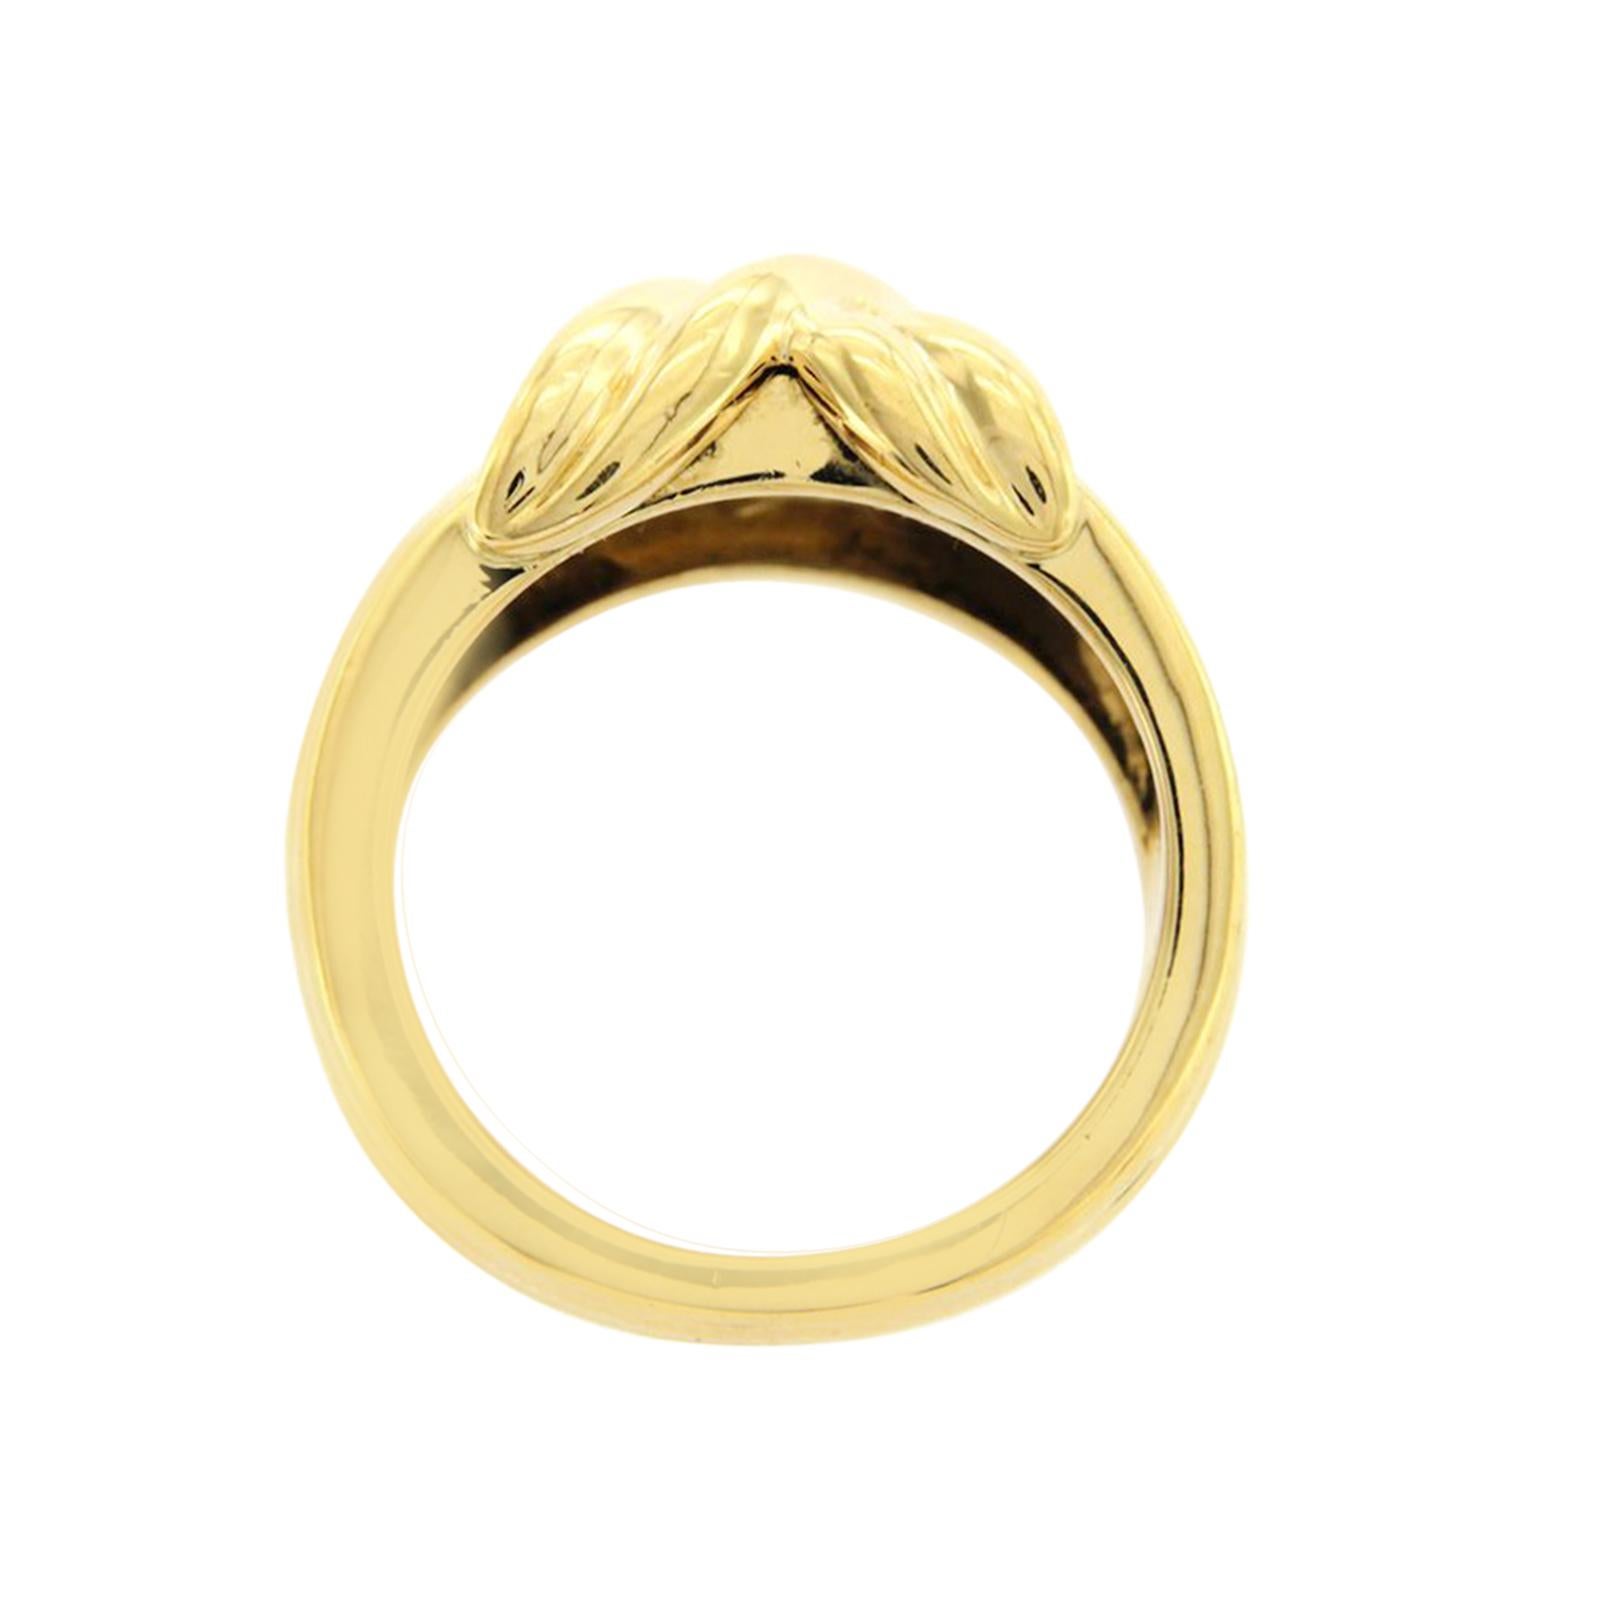 Type: Ring
Top: 12.6 mm
Band Width: 5 mm
Metal: Yellow Gold
Metal Purity: 750
Size:6.5
Hallmarks: Tiffany and Co 750
Total Weight: 12.4 Grams
Stone Type: None
Condition: Pre Owned
Stock Number: U114